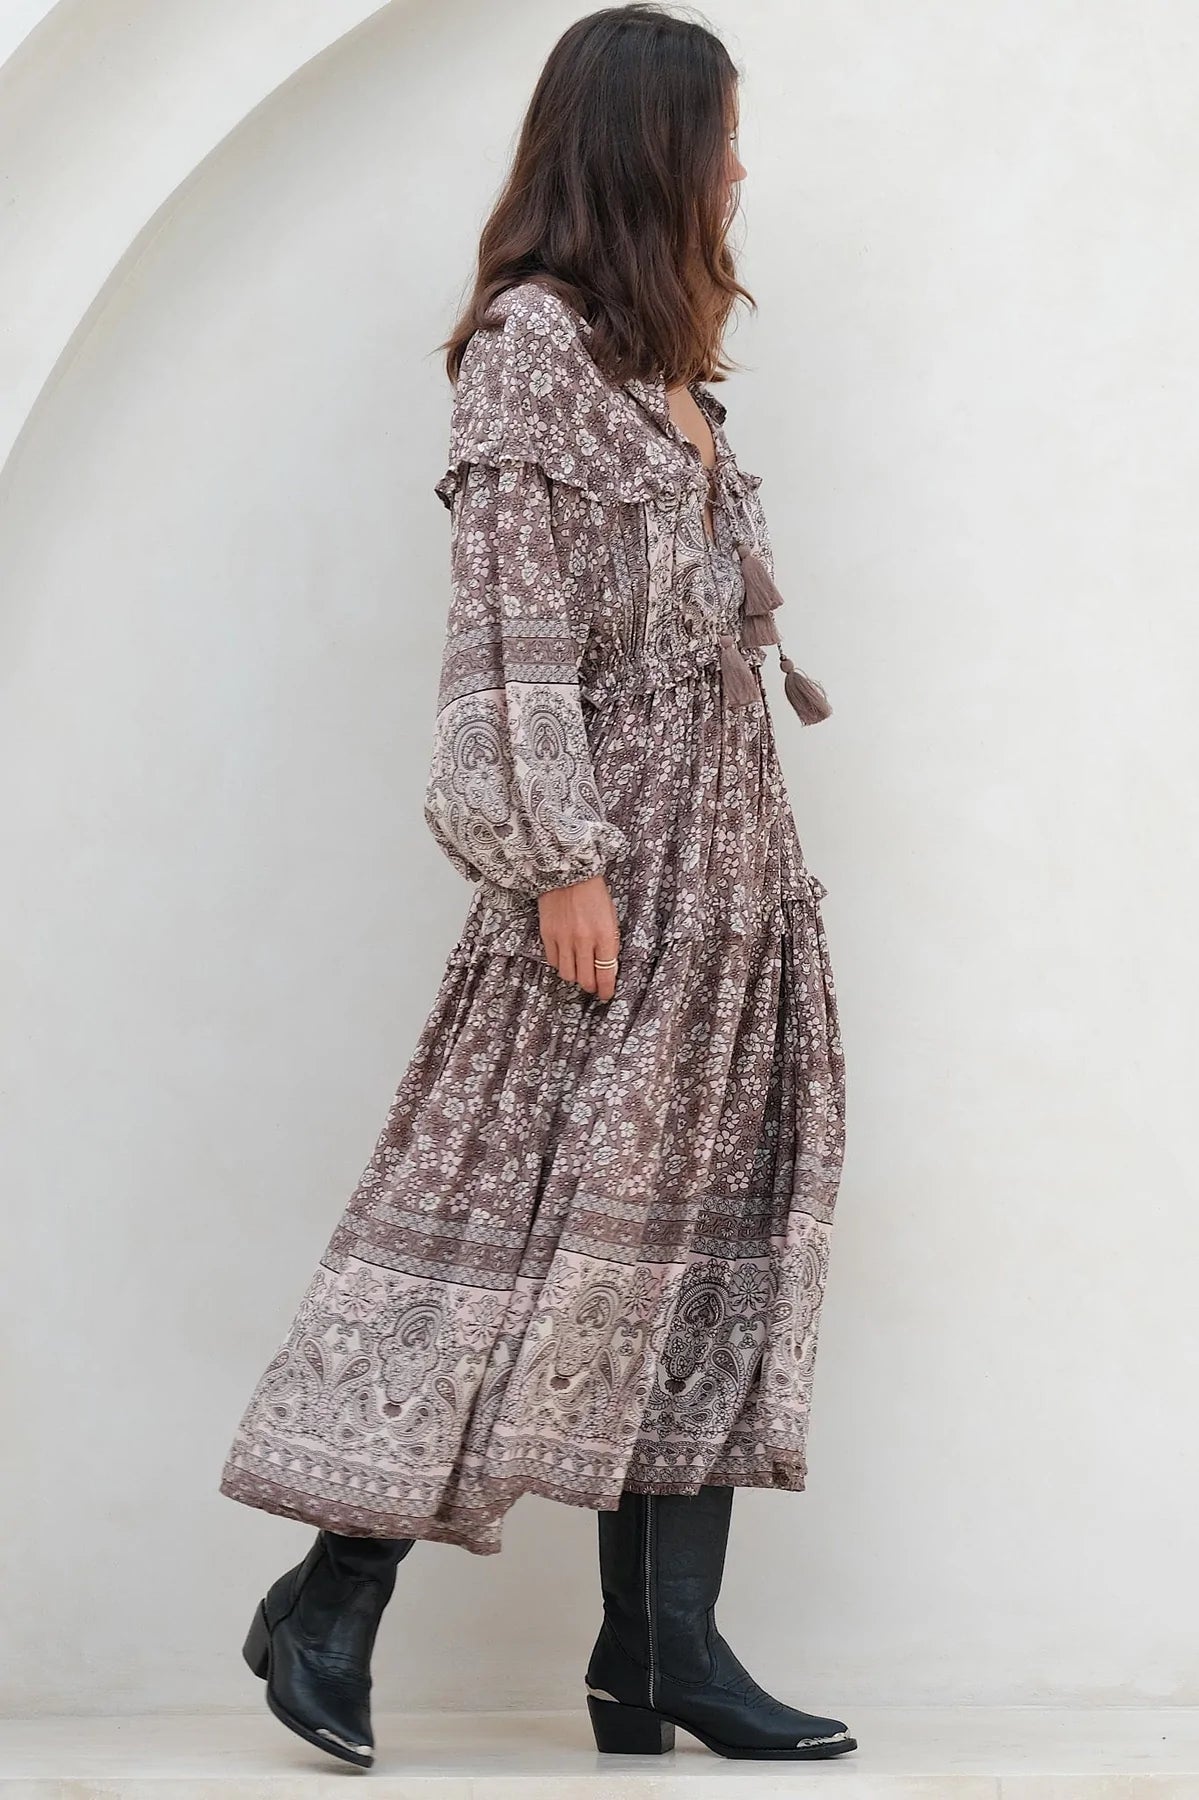 Model wearing celestial brown floral boho dress from Mahli the label